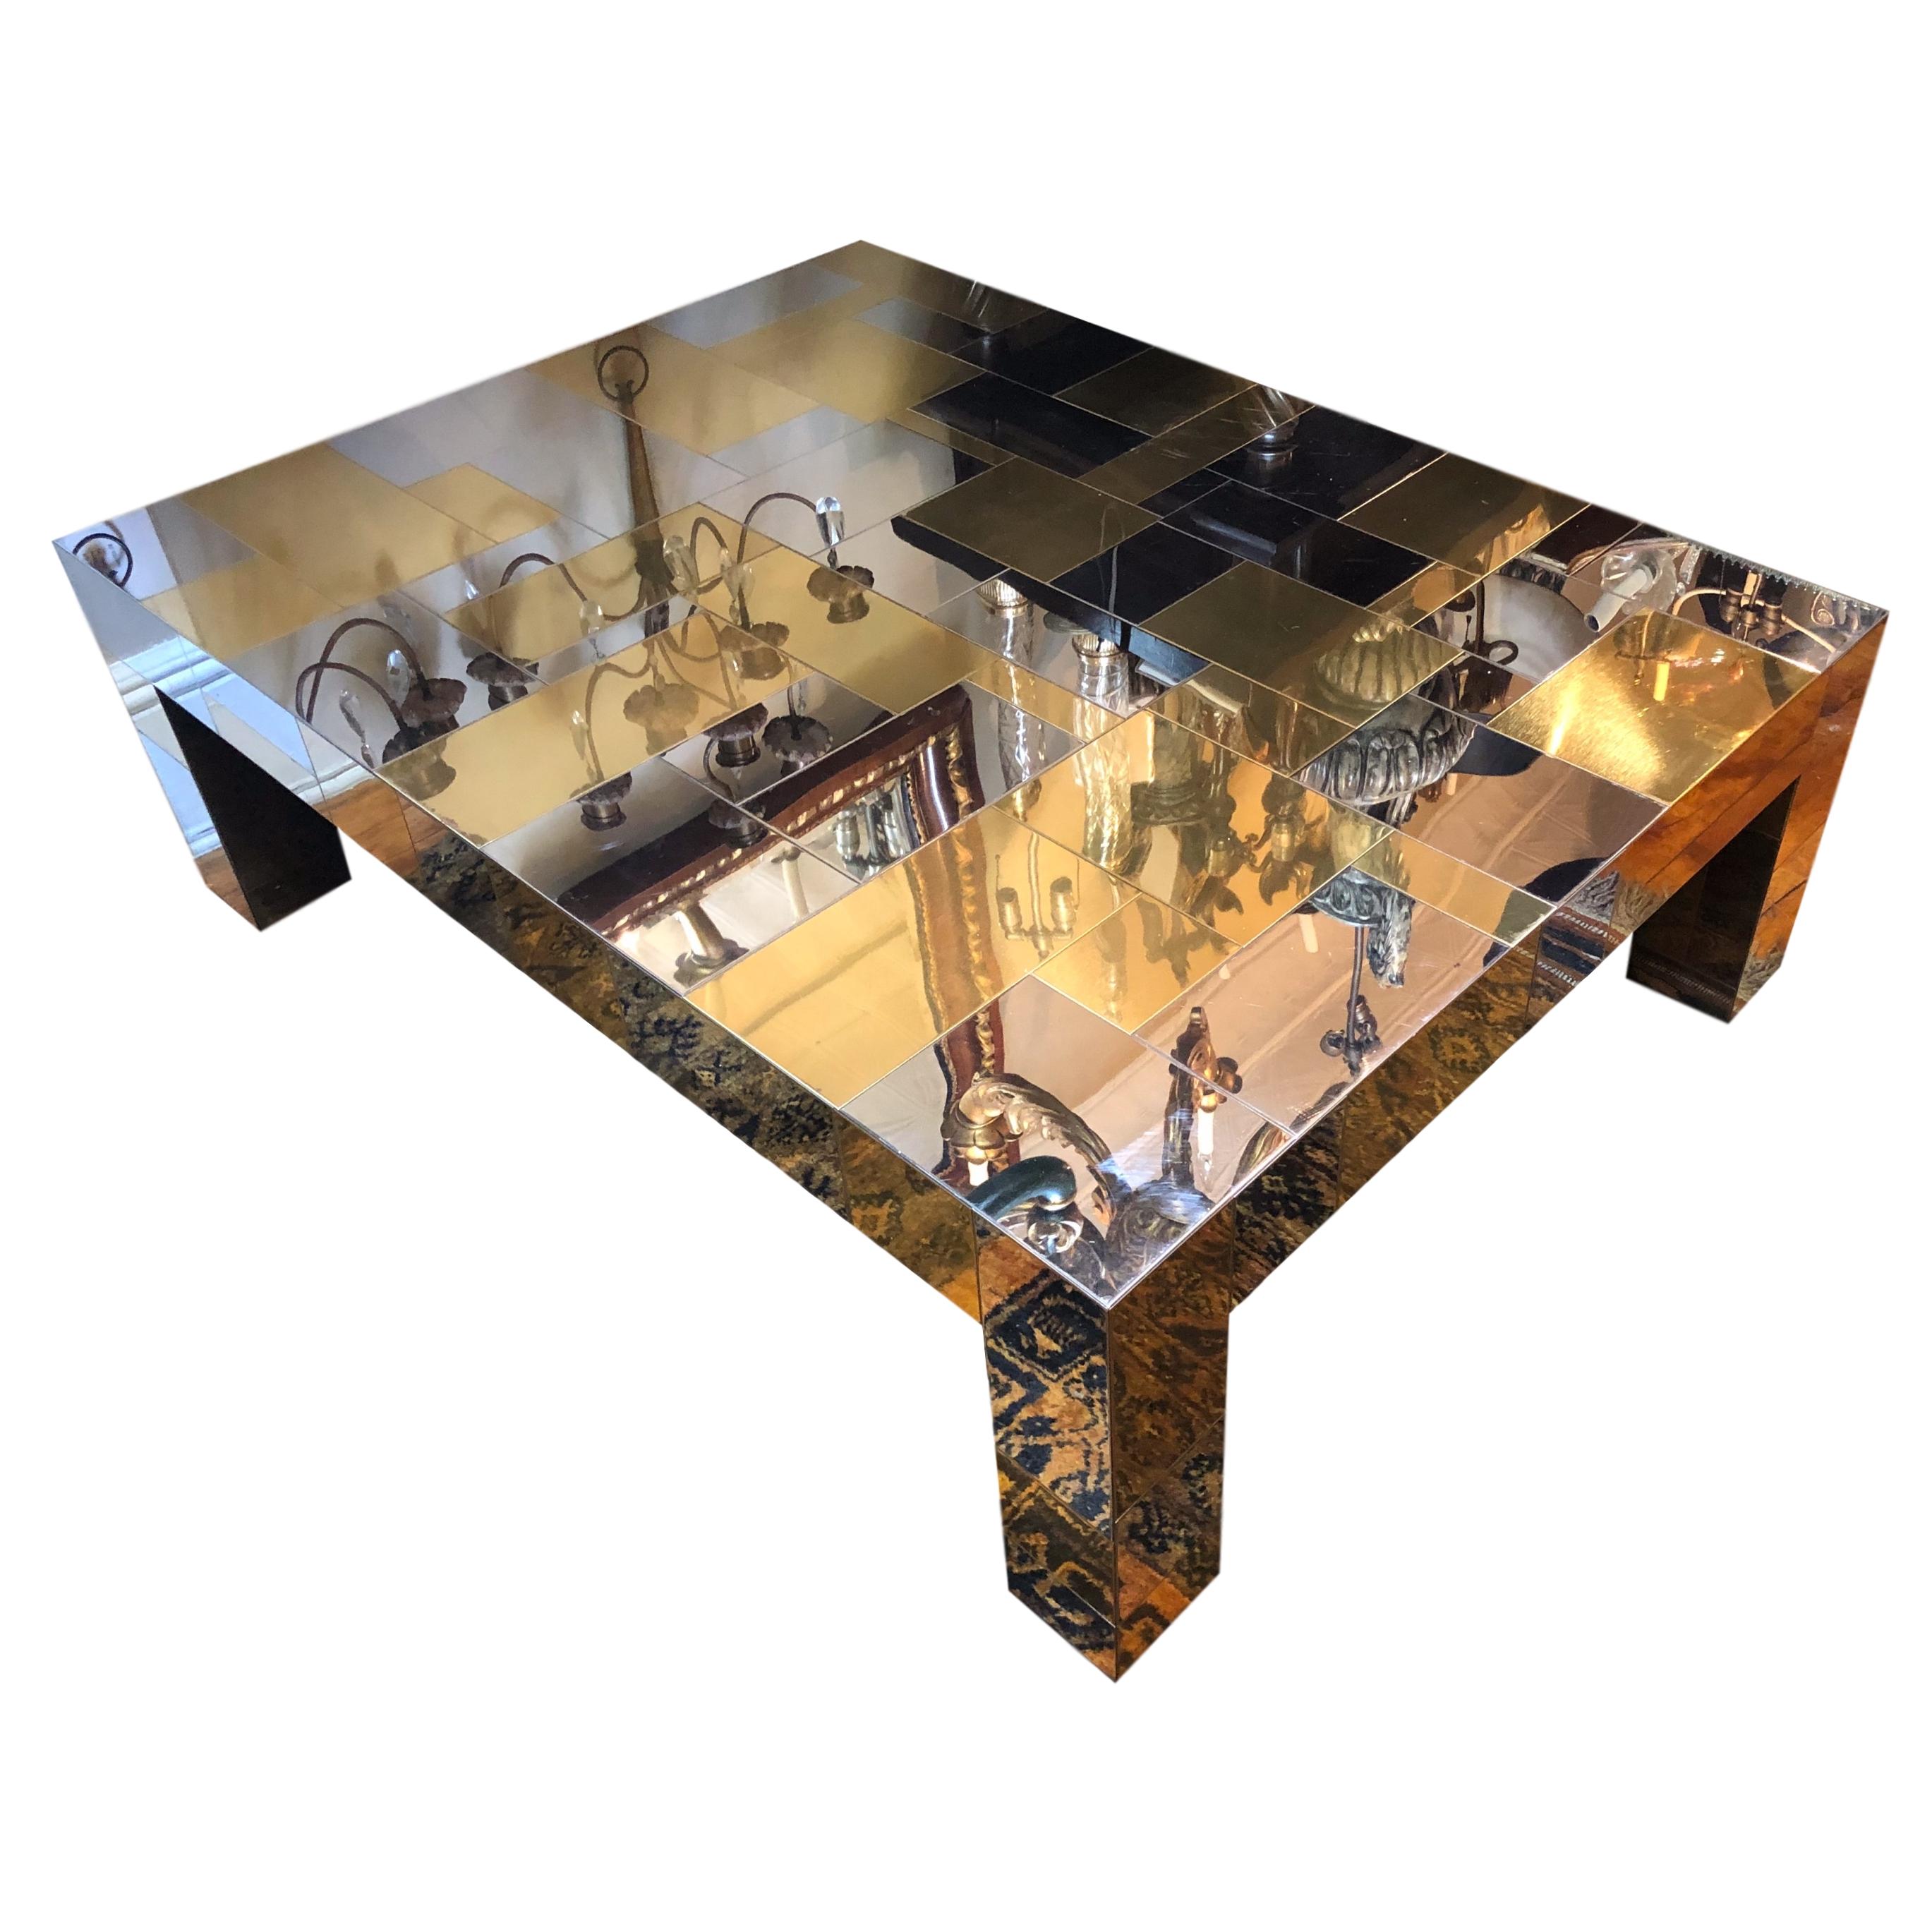 A circa 1970s brass and nickel-plated coffee table.

Measurements:
Height: 15